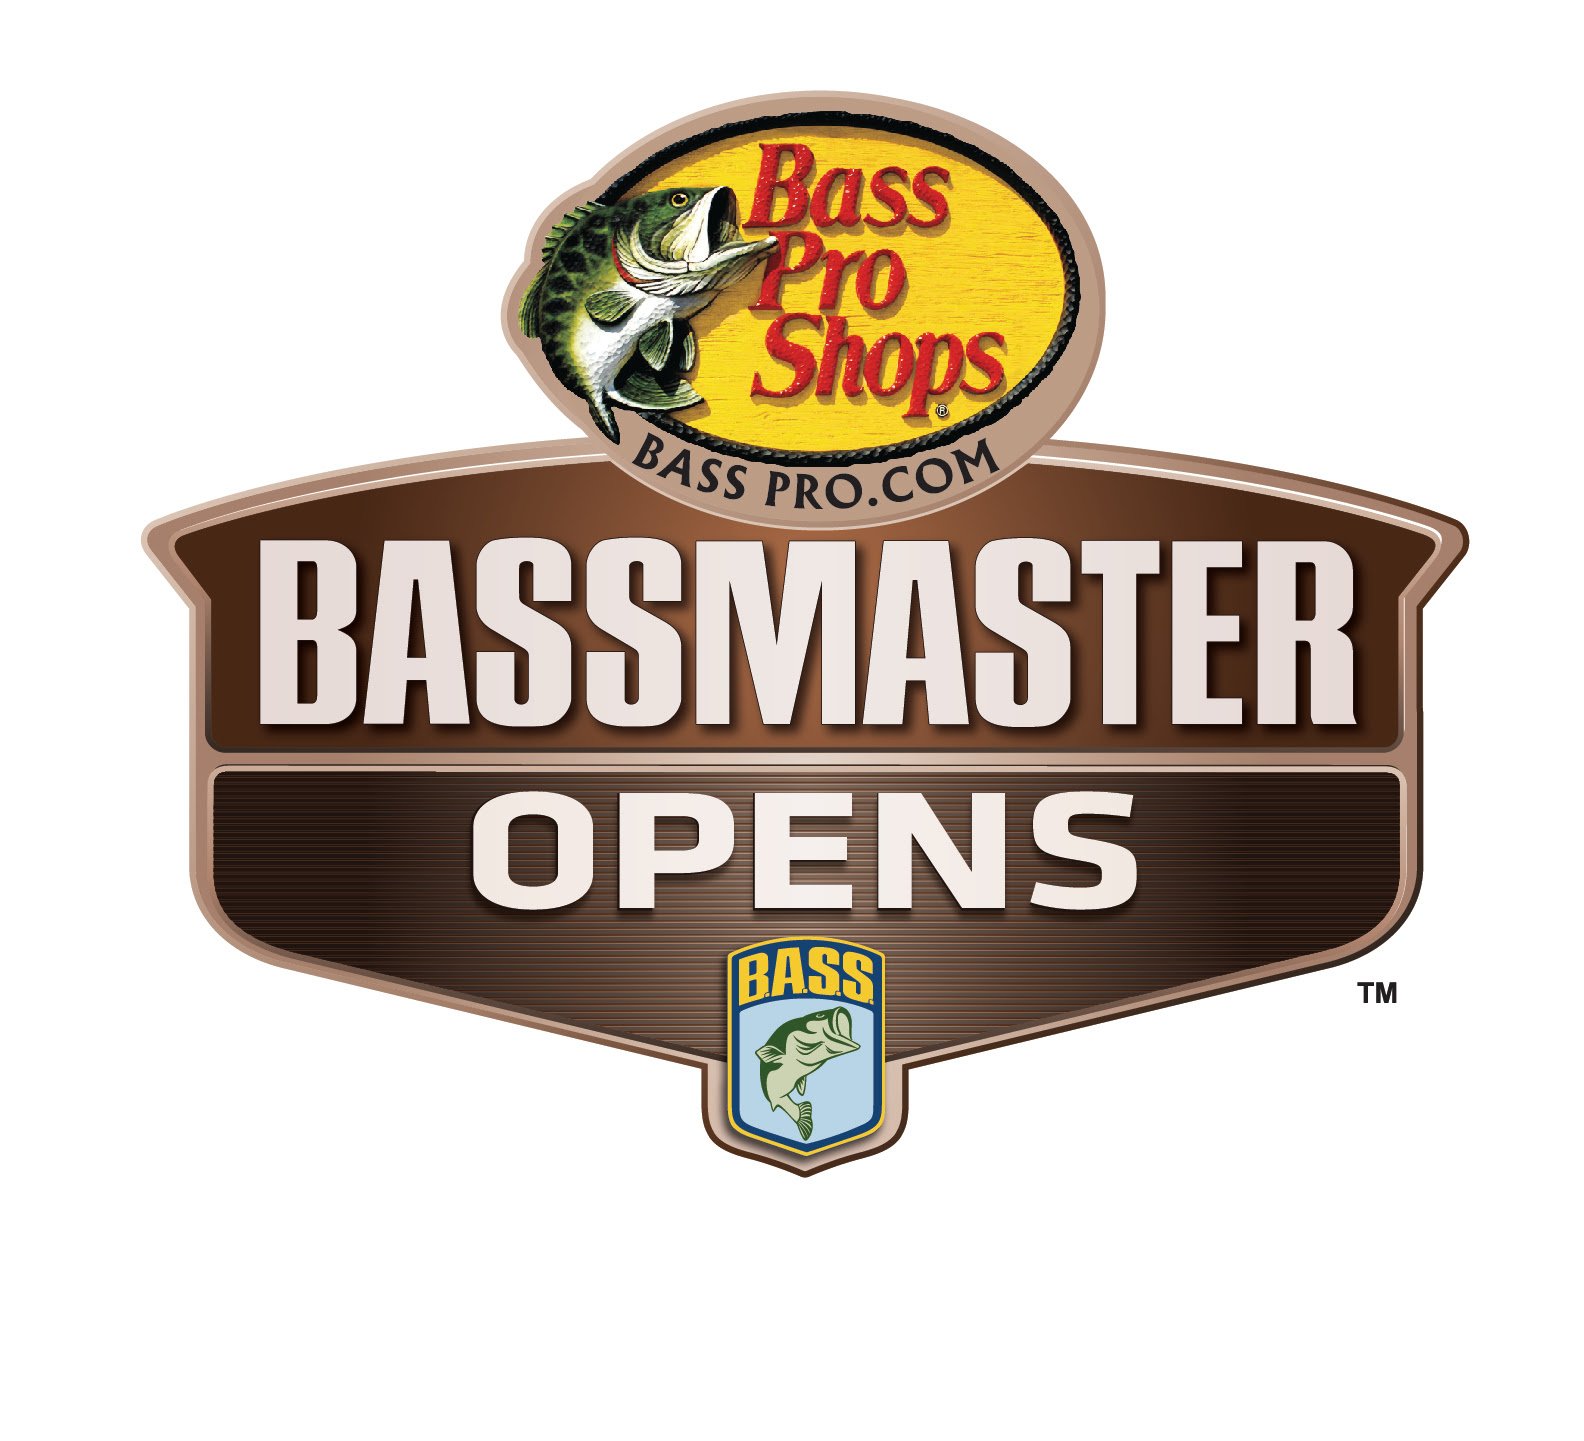 96 new bass toys for 2020 and 2021 - Bassmaster